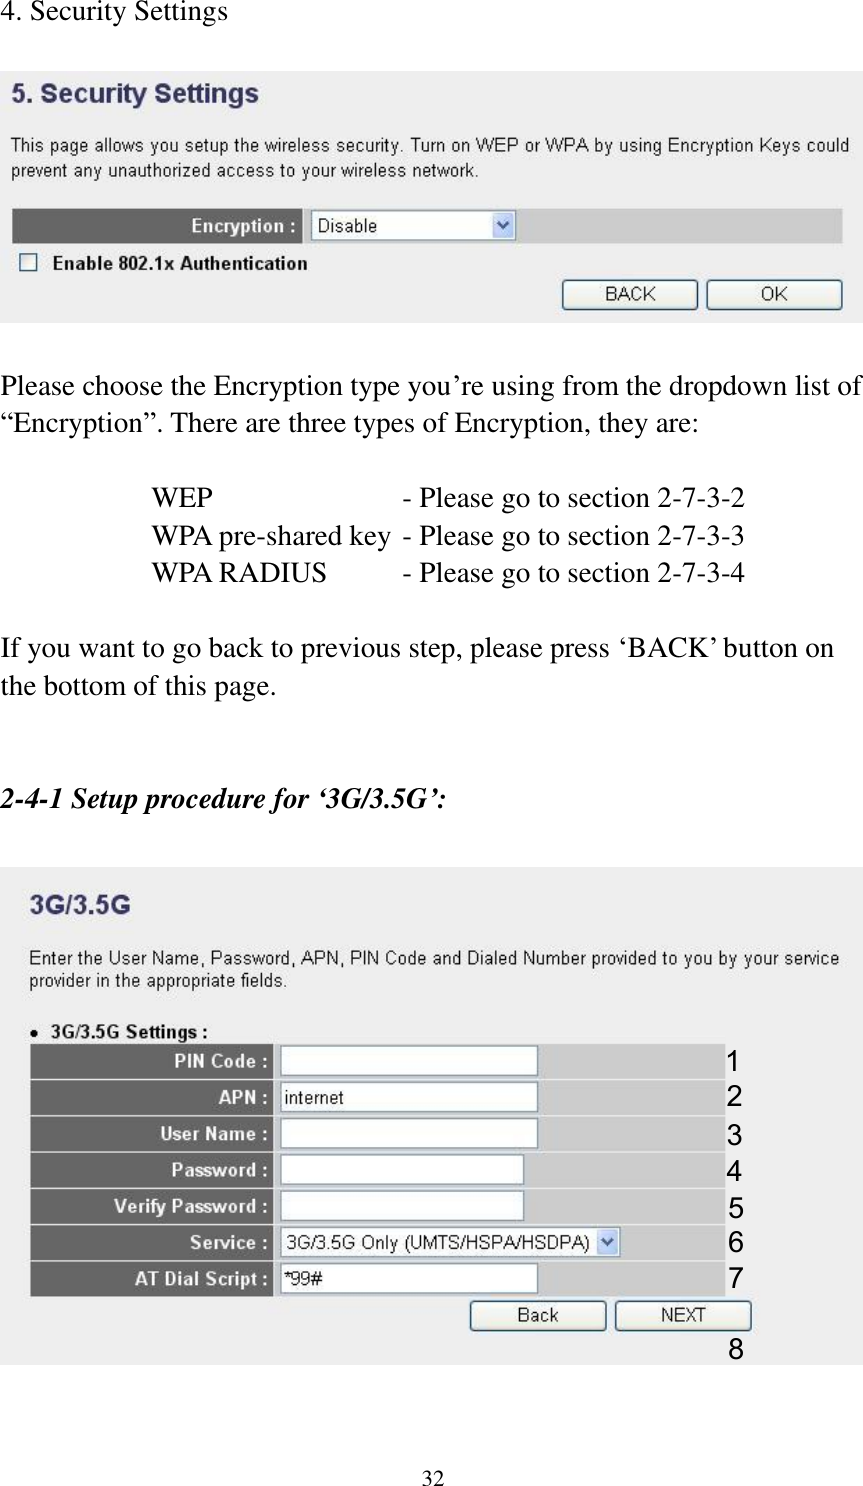 32 4. Security Settings    Please choose the Encryption type you‟re using from the dropdown list of “Encryption”. There are three types of Encryption, they are:  WEP              - Please go to section 2-7-3-2 WPA pre-shared key - Please go to section 2-7-3-3 WPA RADIUS    - Please go to section 2-7-3-4  If you want to go back to previous step, please press „BACK‟ button on the bottom of this page.   2-4-1 Setup procedure for ‘3G/3.5G’:    1 2 3 4 5 6 7 8 